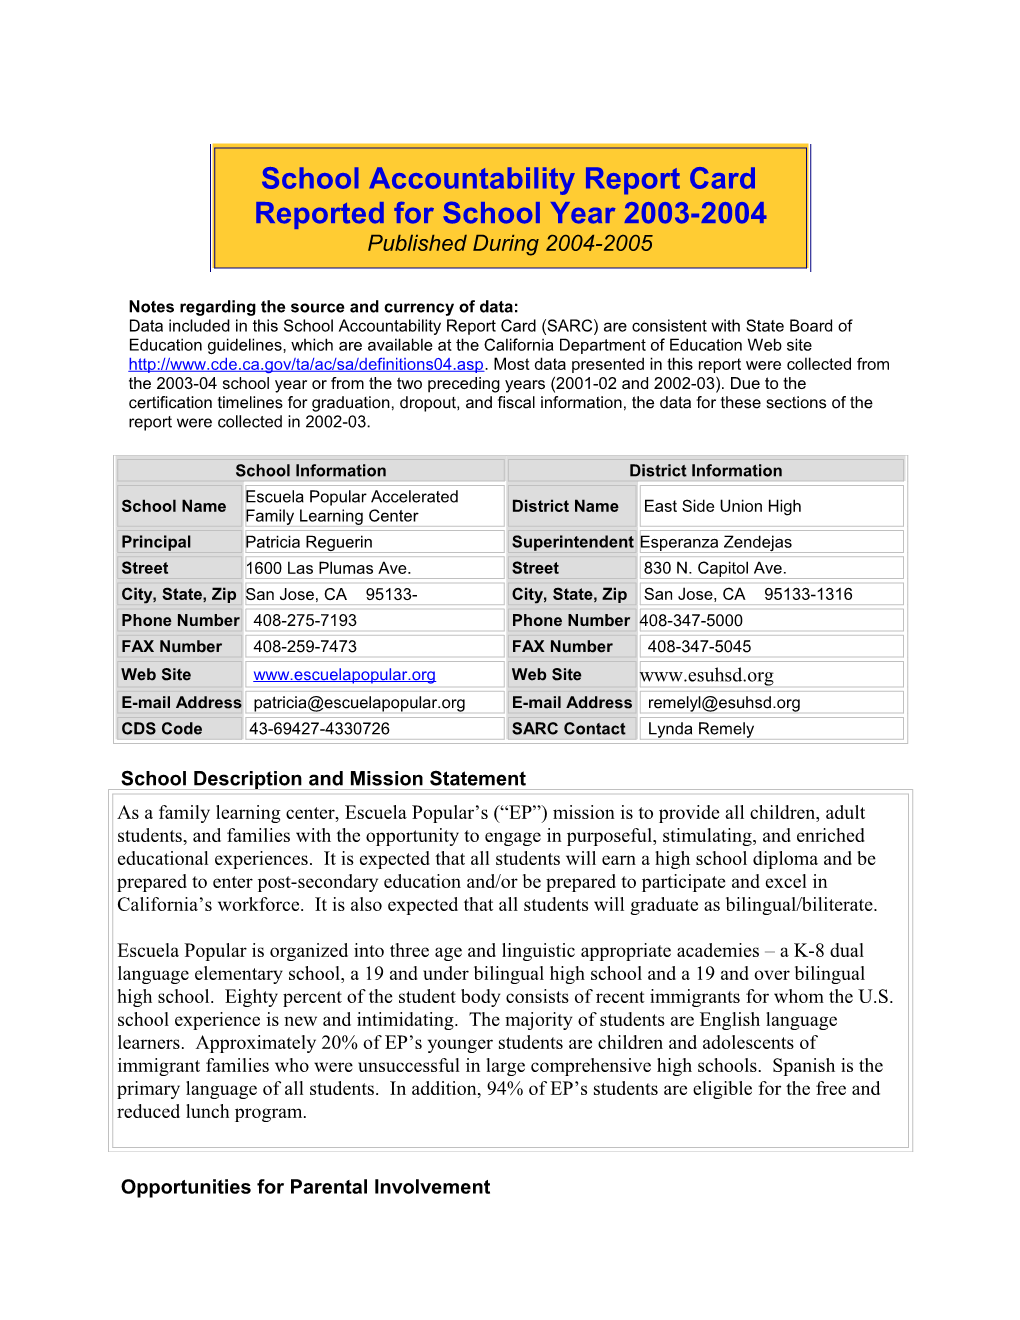 School Accountability Report Card Reported for School Year 2003-2004 Published During 2004-2005